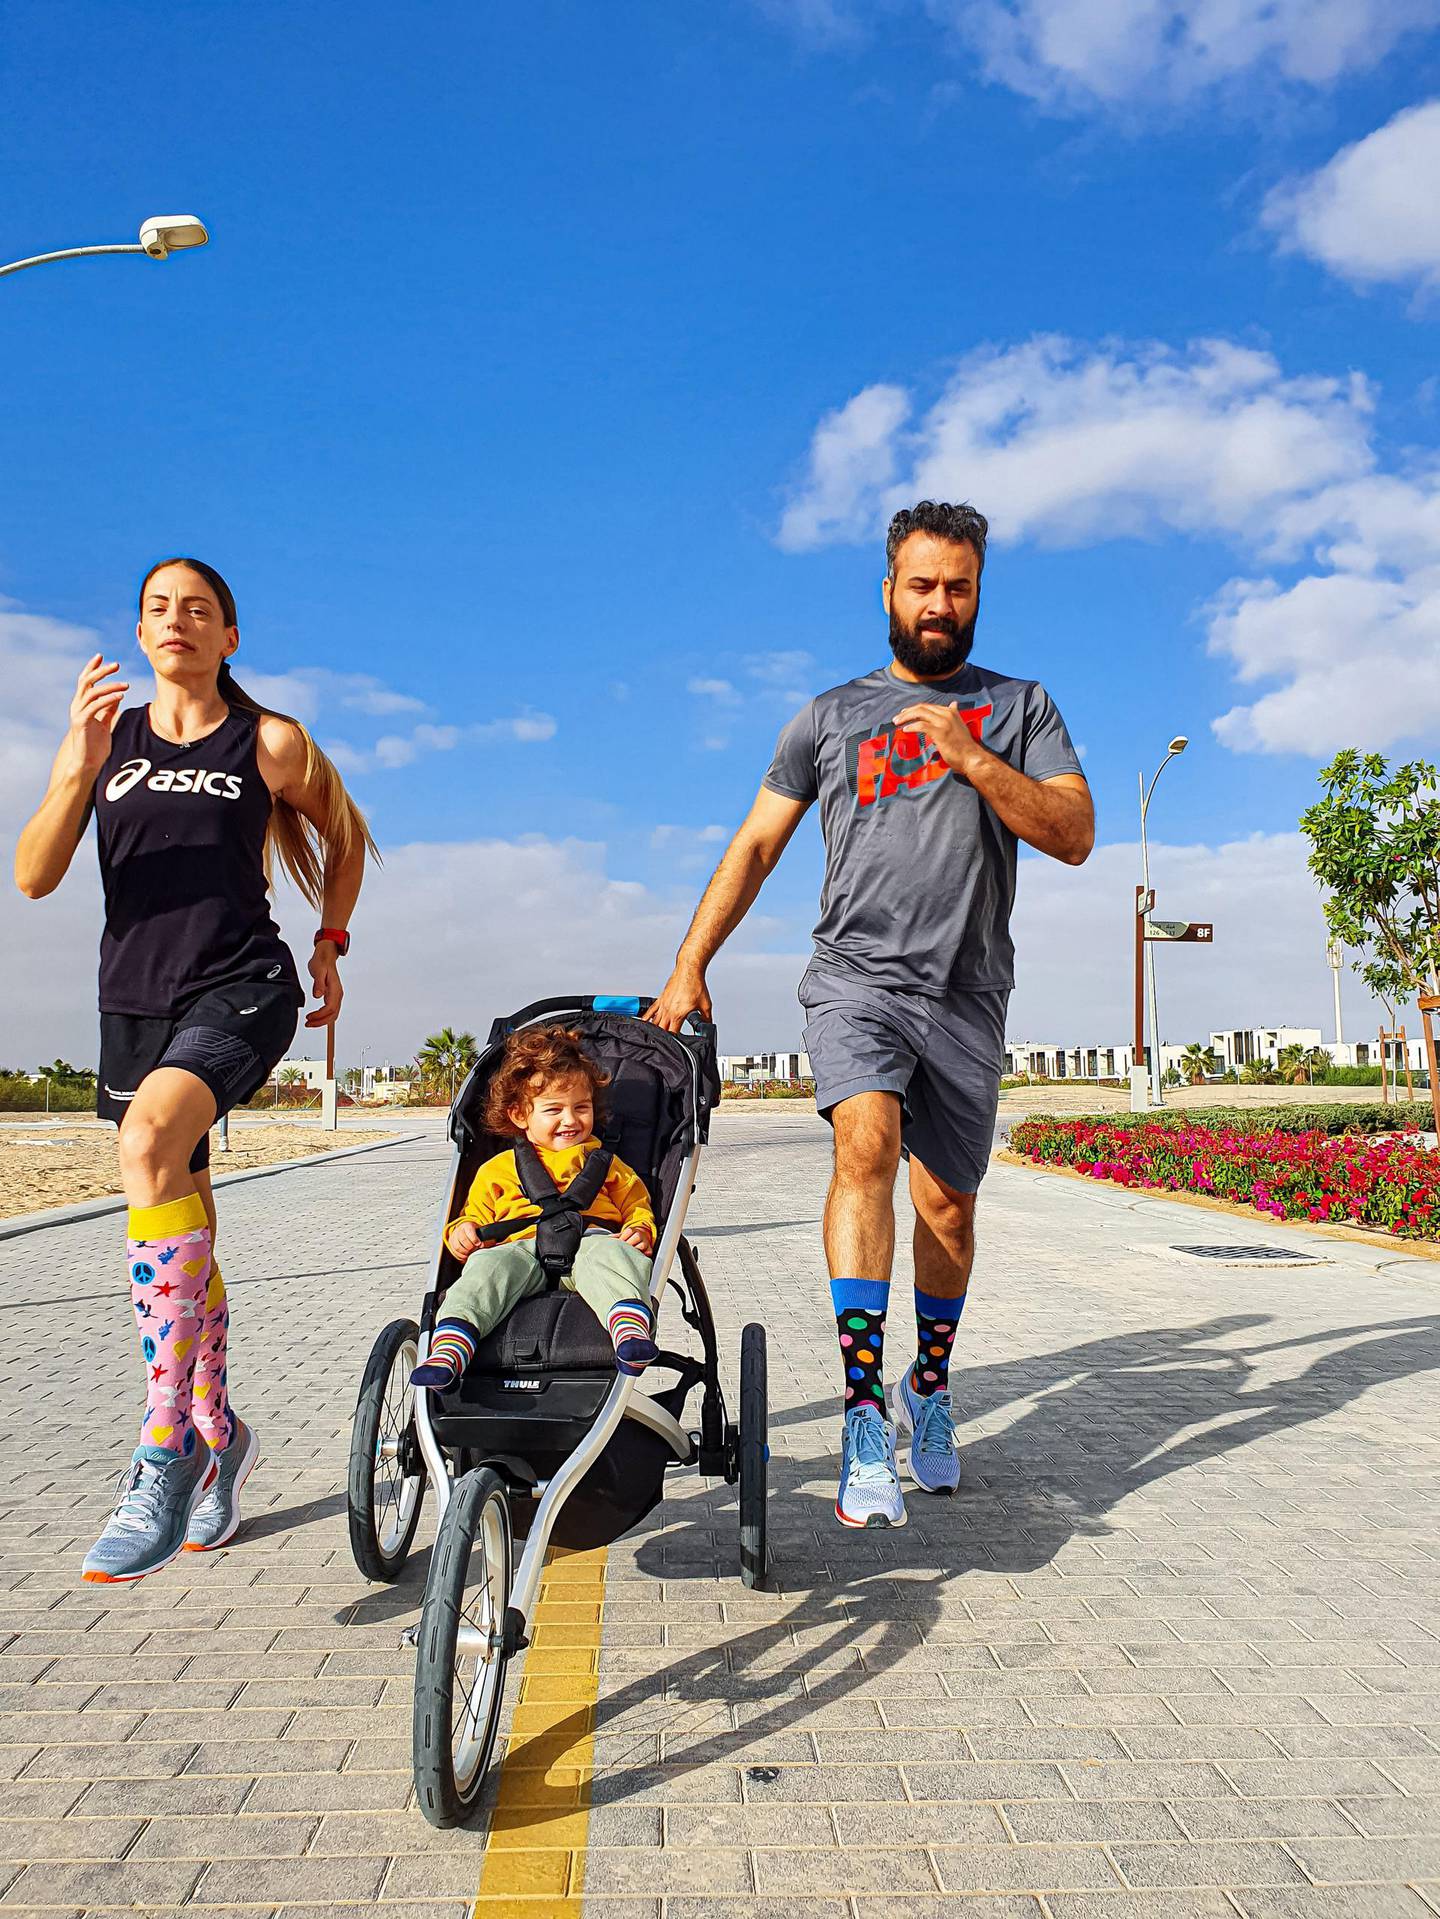 Tania Lolla Kaddoura and her husband, Mohamed, involve their toddler Noah in as many activities as possible.